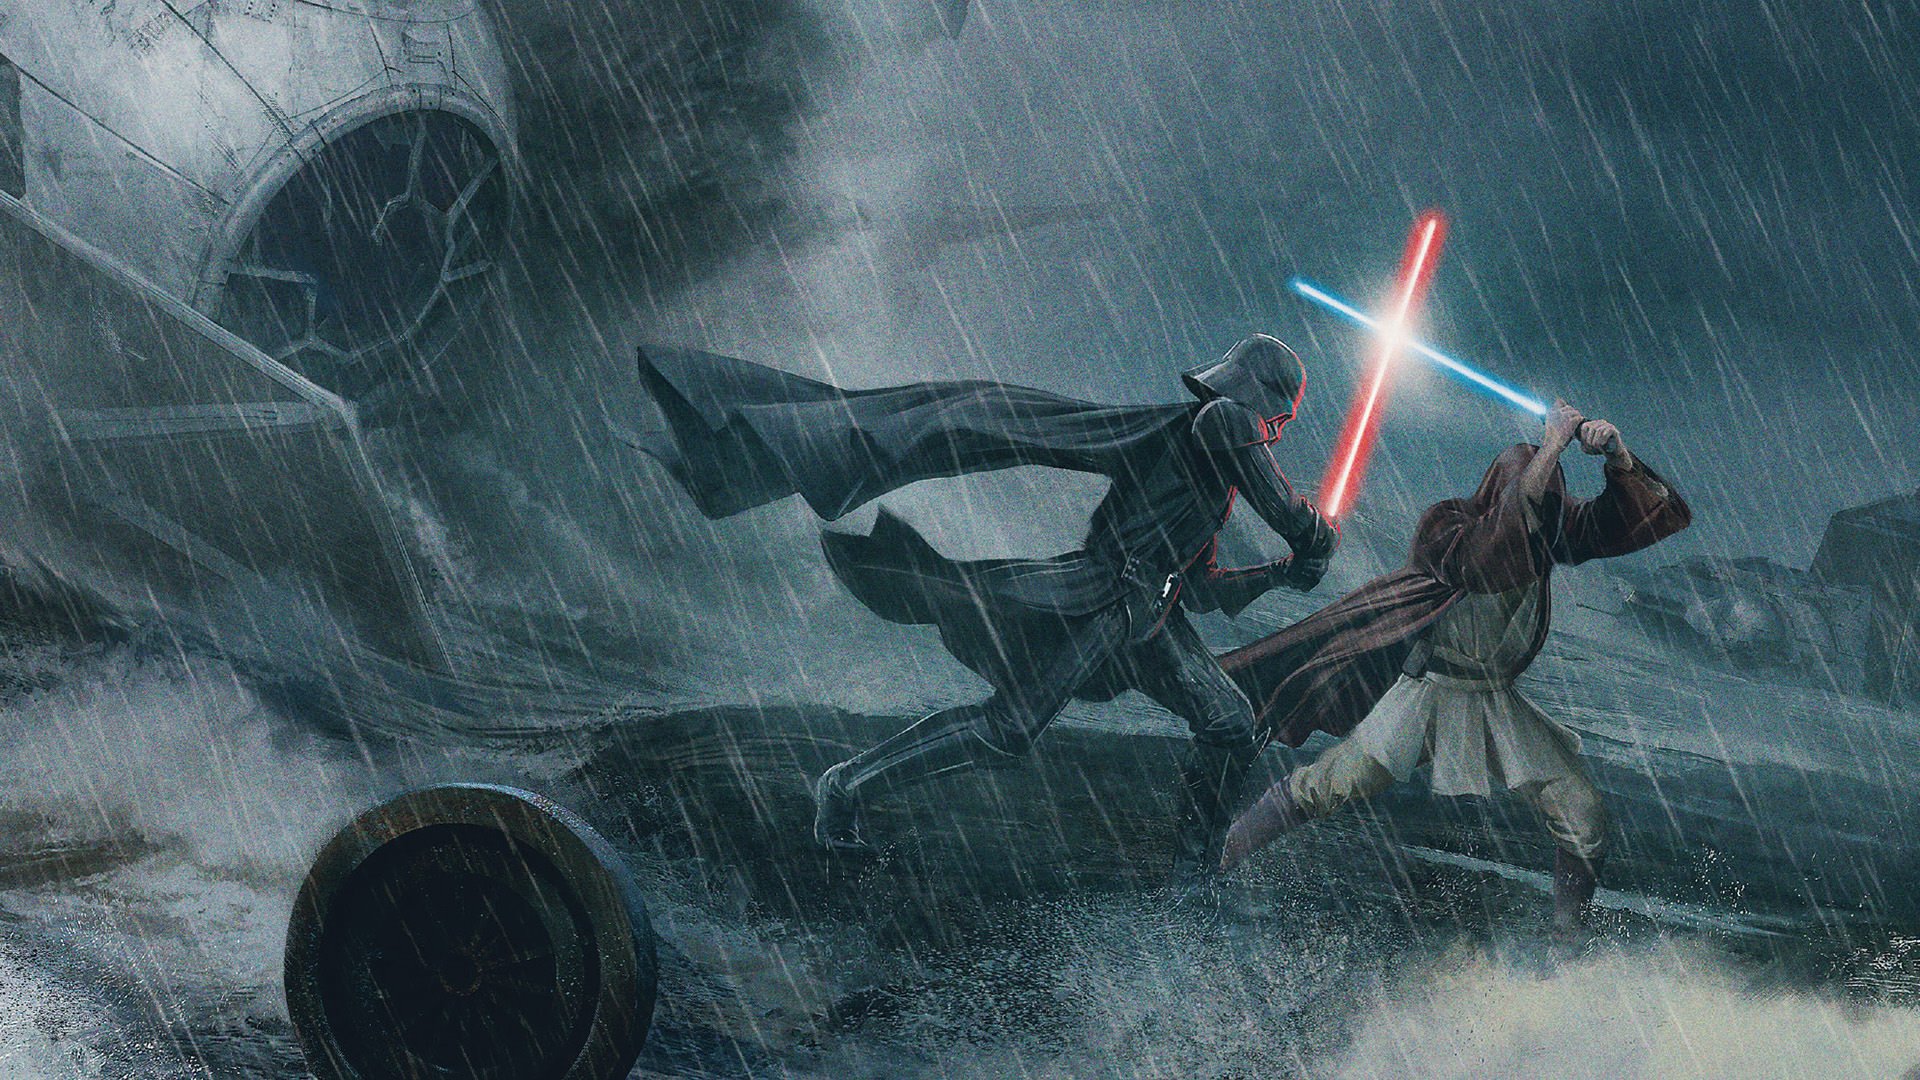 star wars sith wallpaper,action adventure game,fictional character,cg artwork,illustration,games